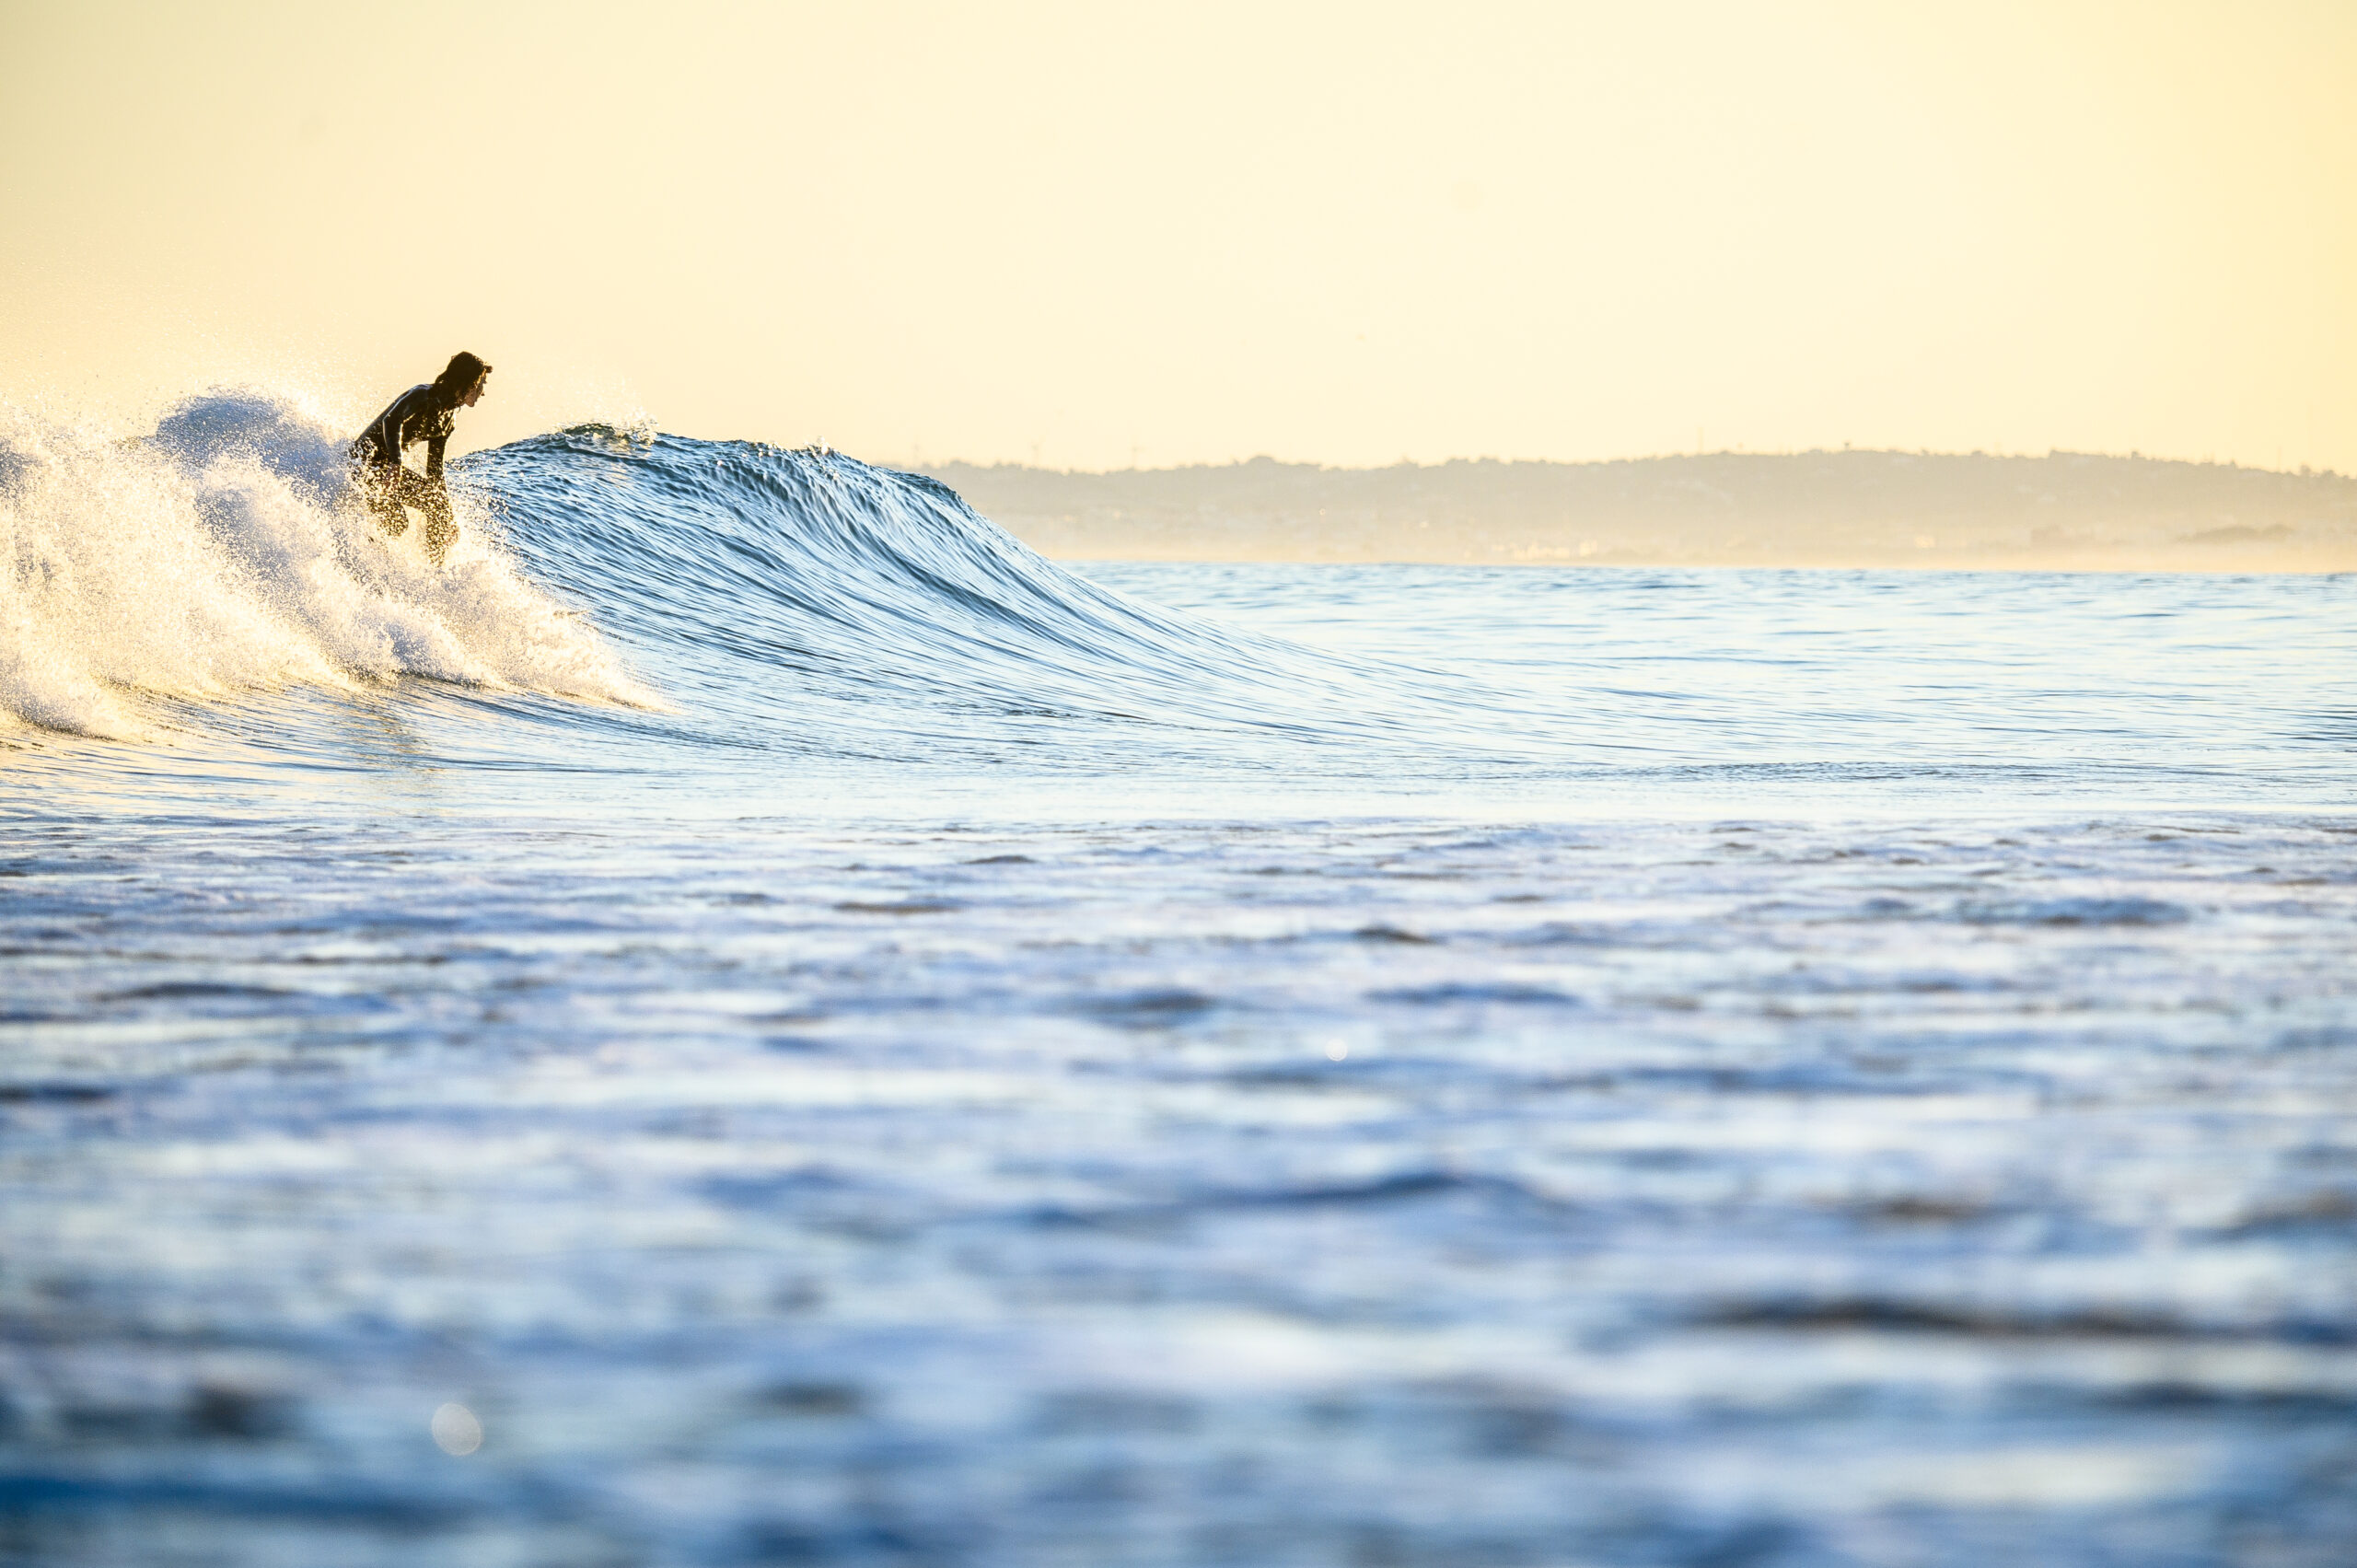 5 reasons to wake up early and score waves!